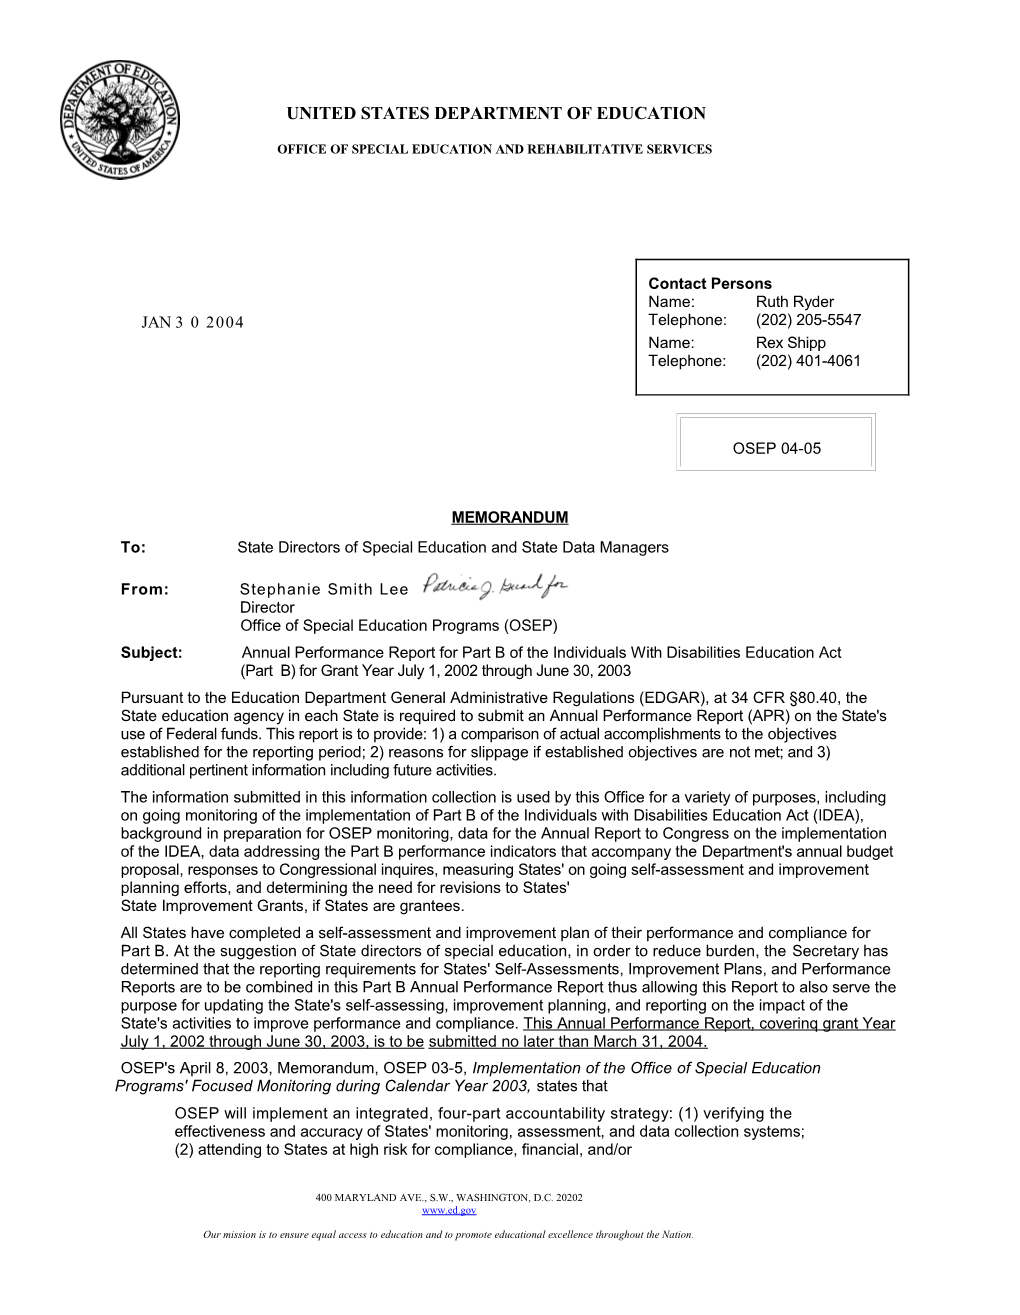 January 30, 2004, OSEP Memo to State Directors of Special Education and State Data Managers